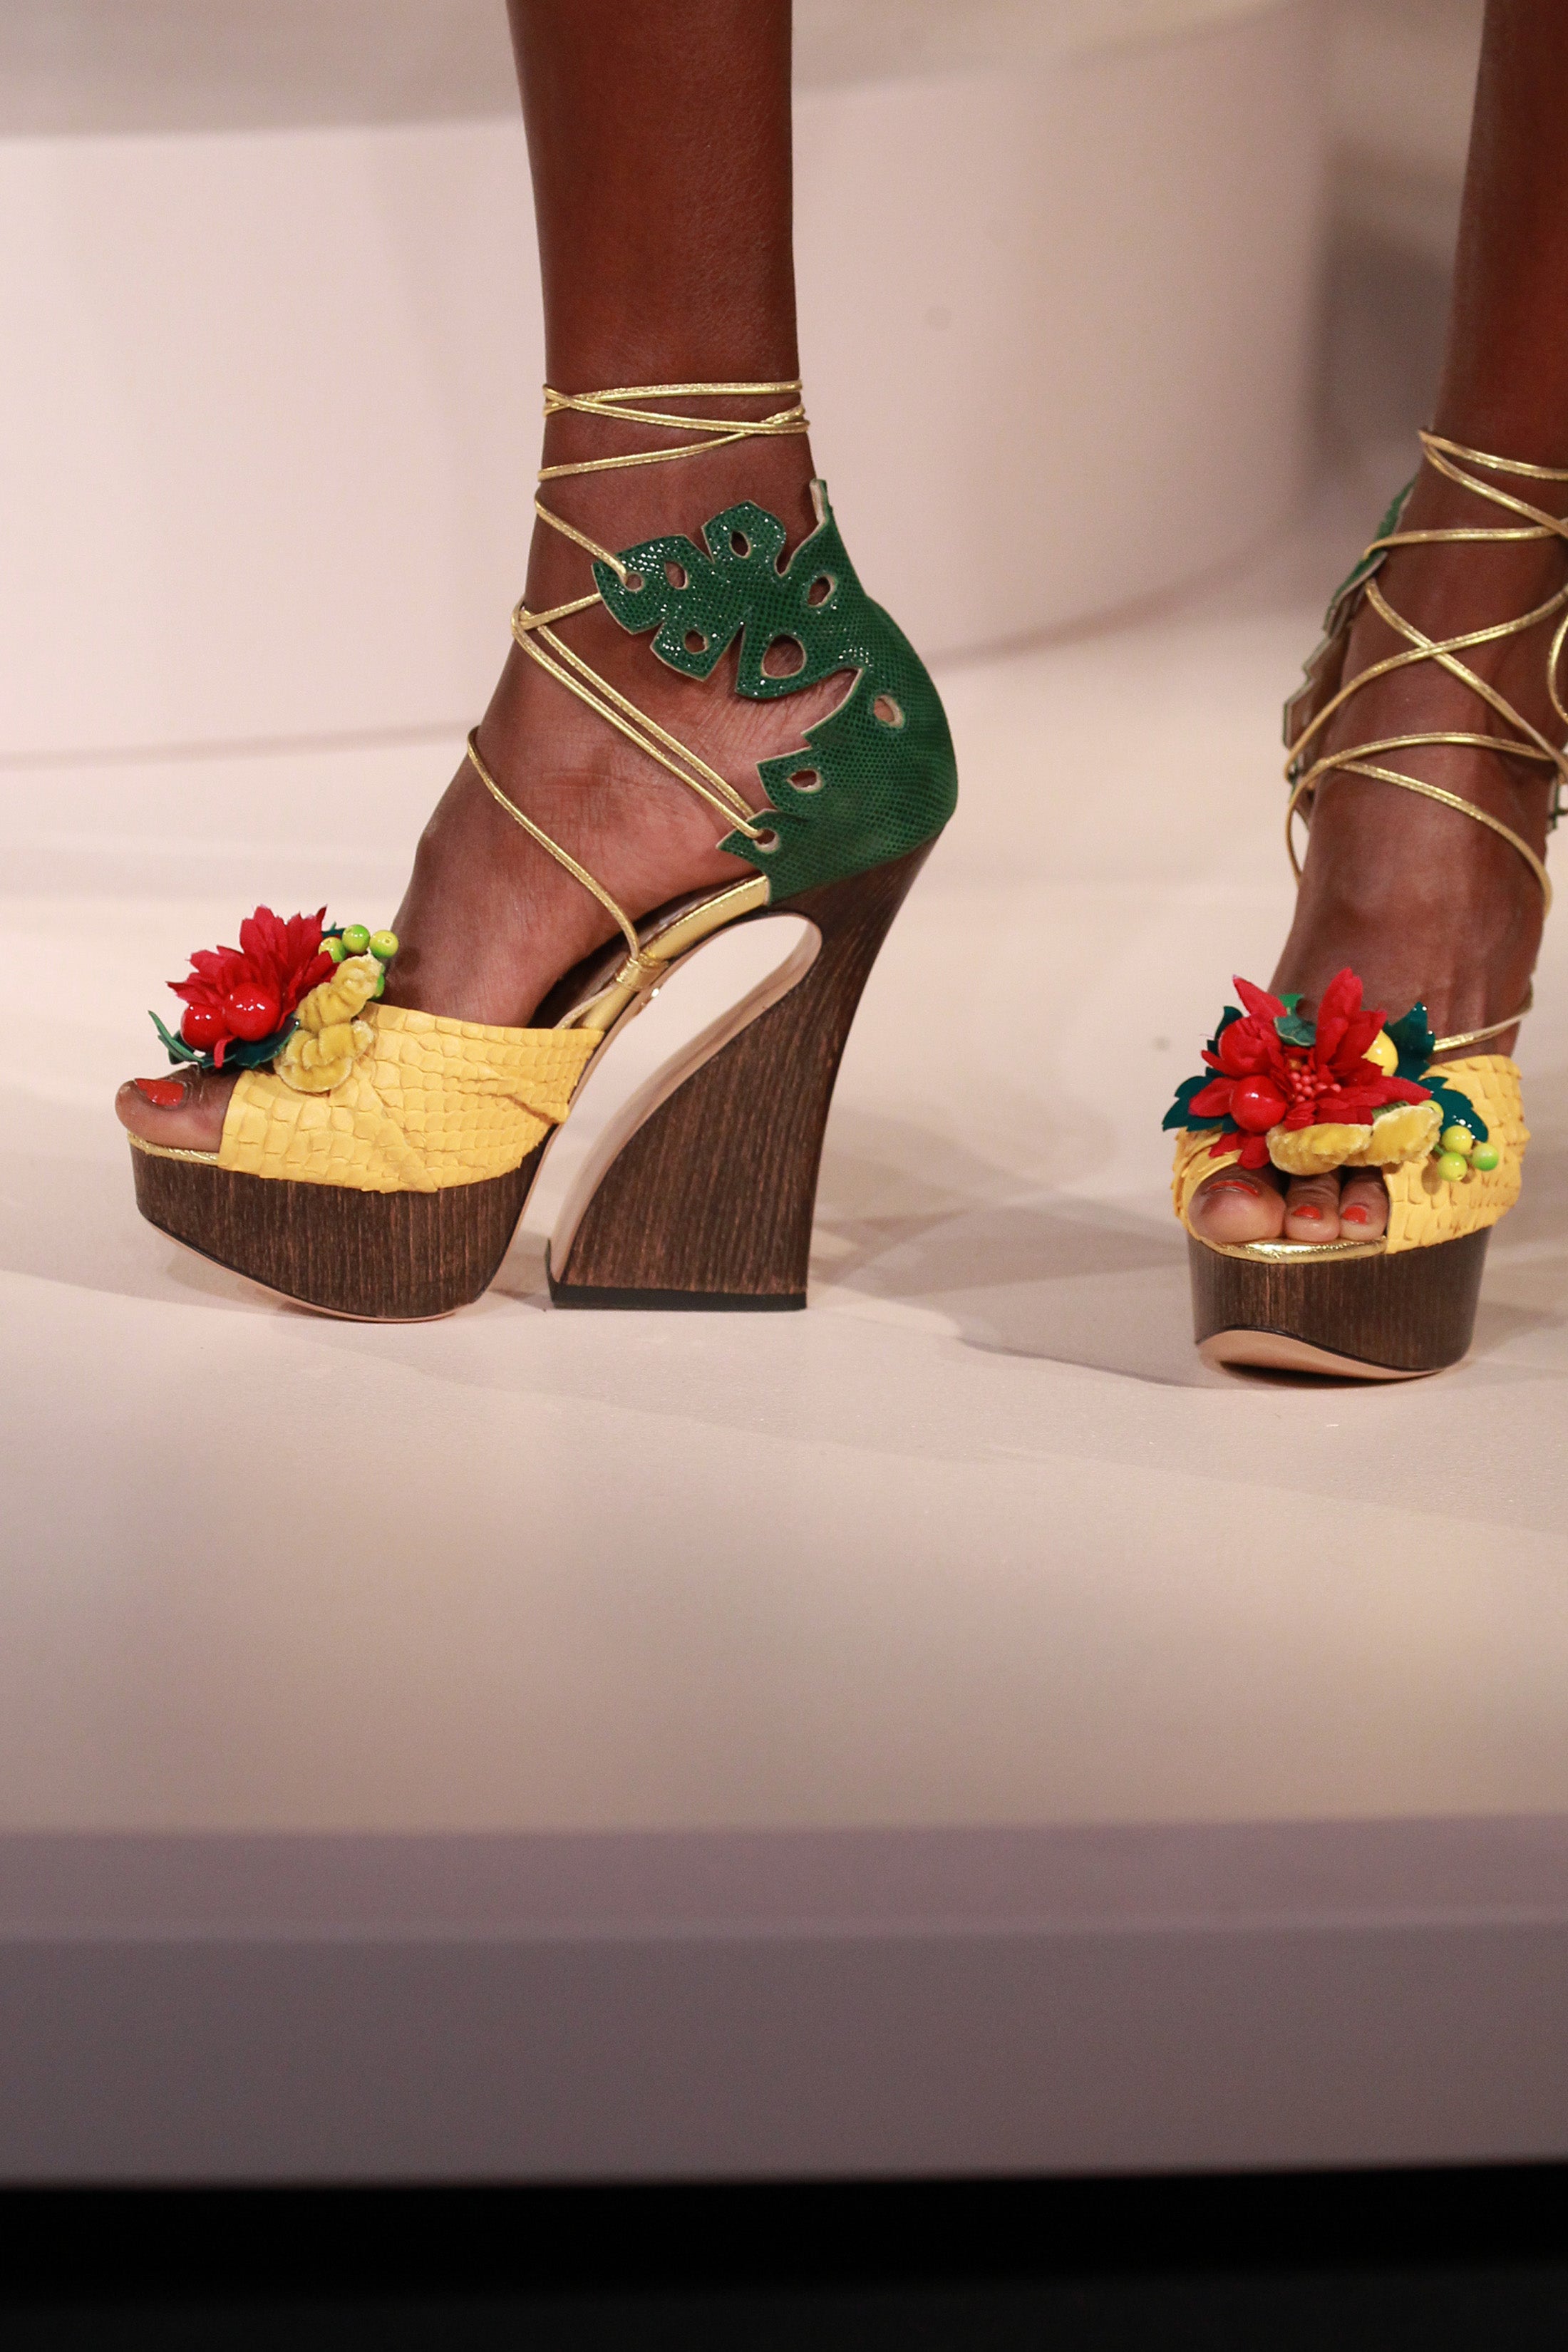 Fruity Fun at Charlotte Olympia
